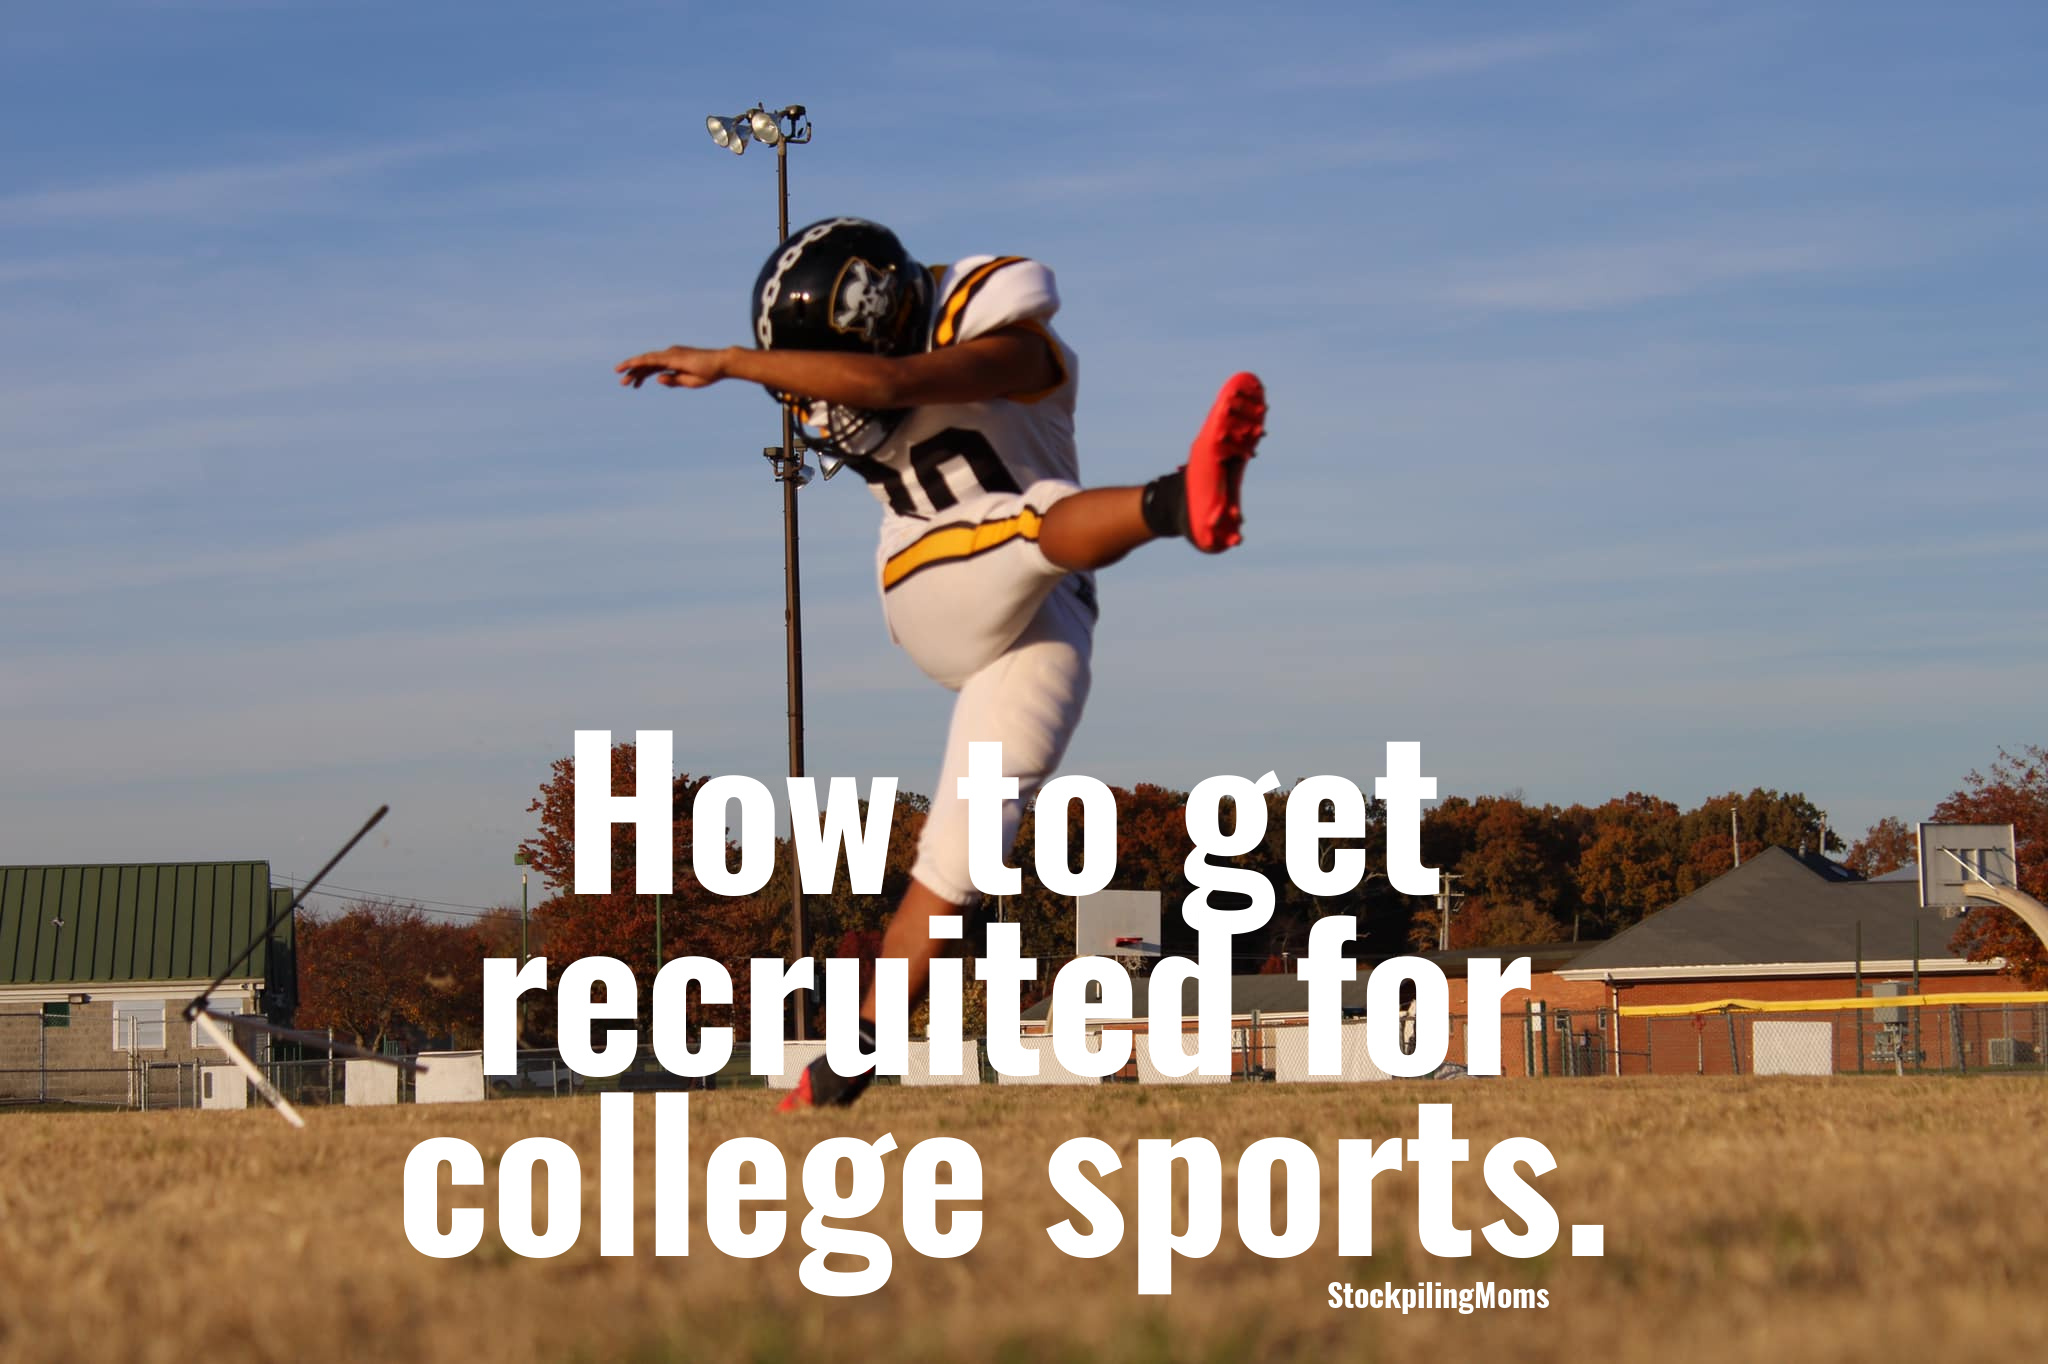 How to get recruited for college sports